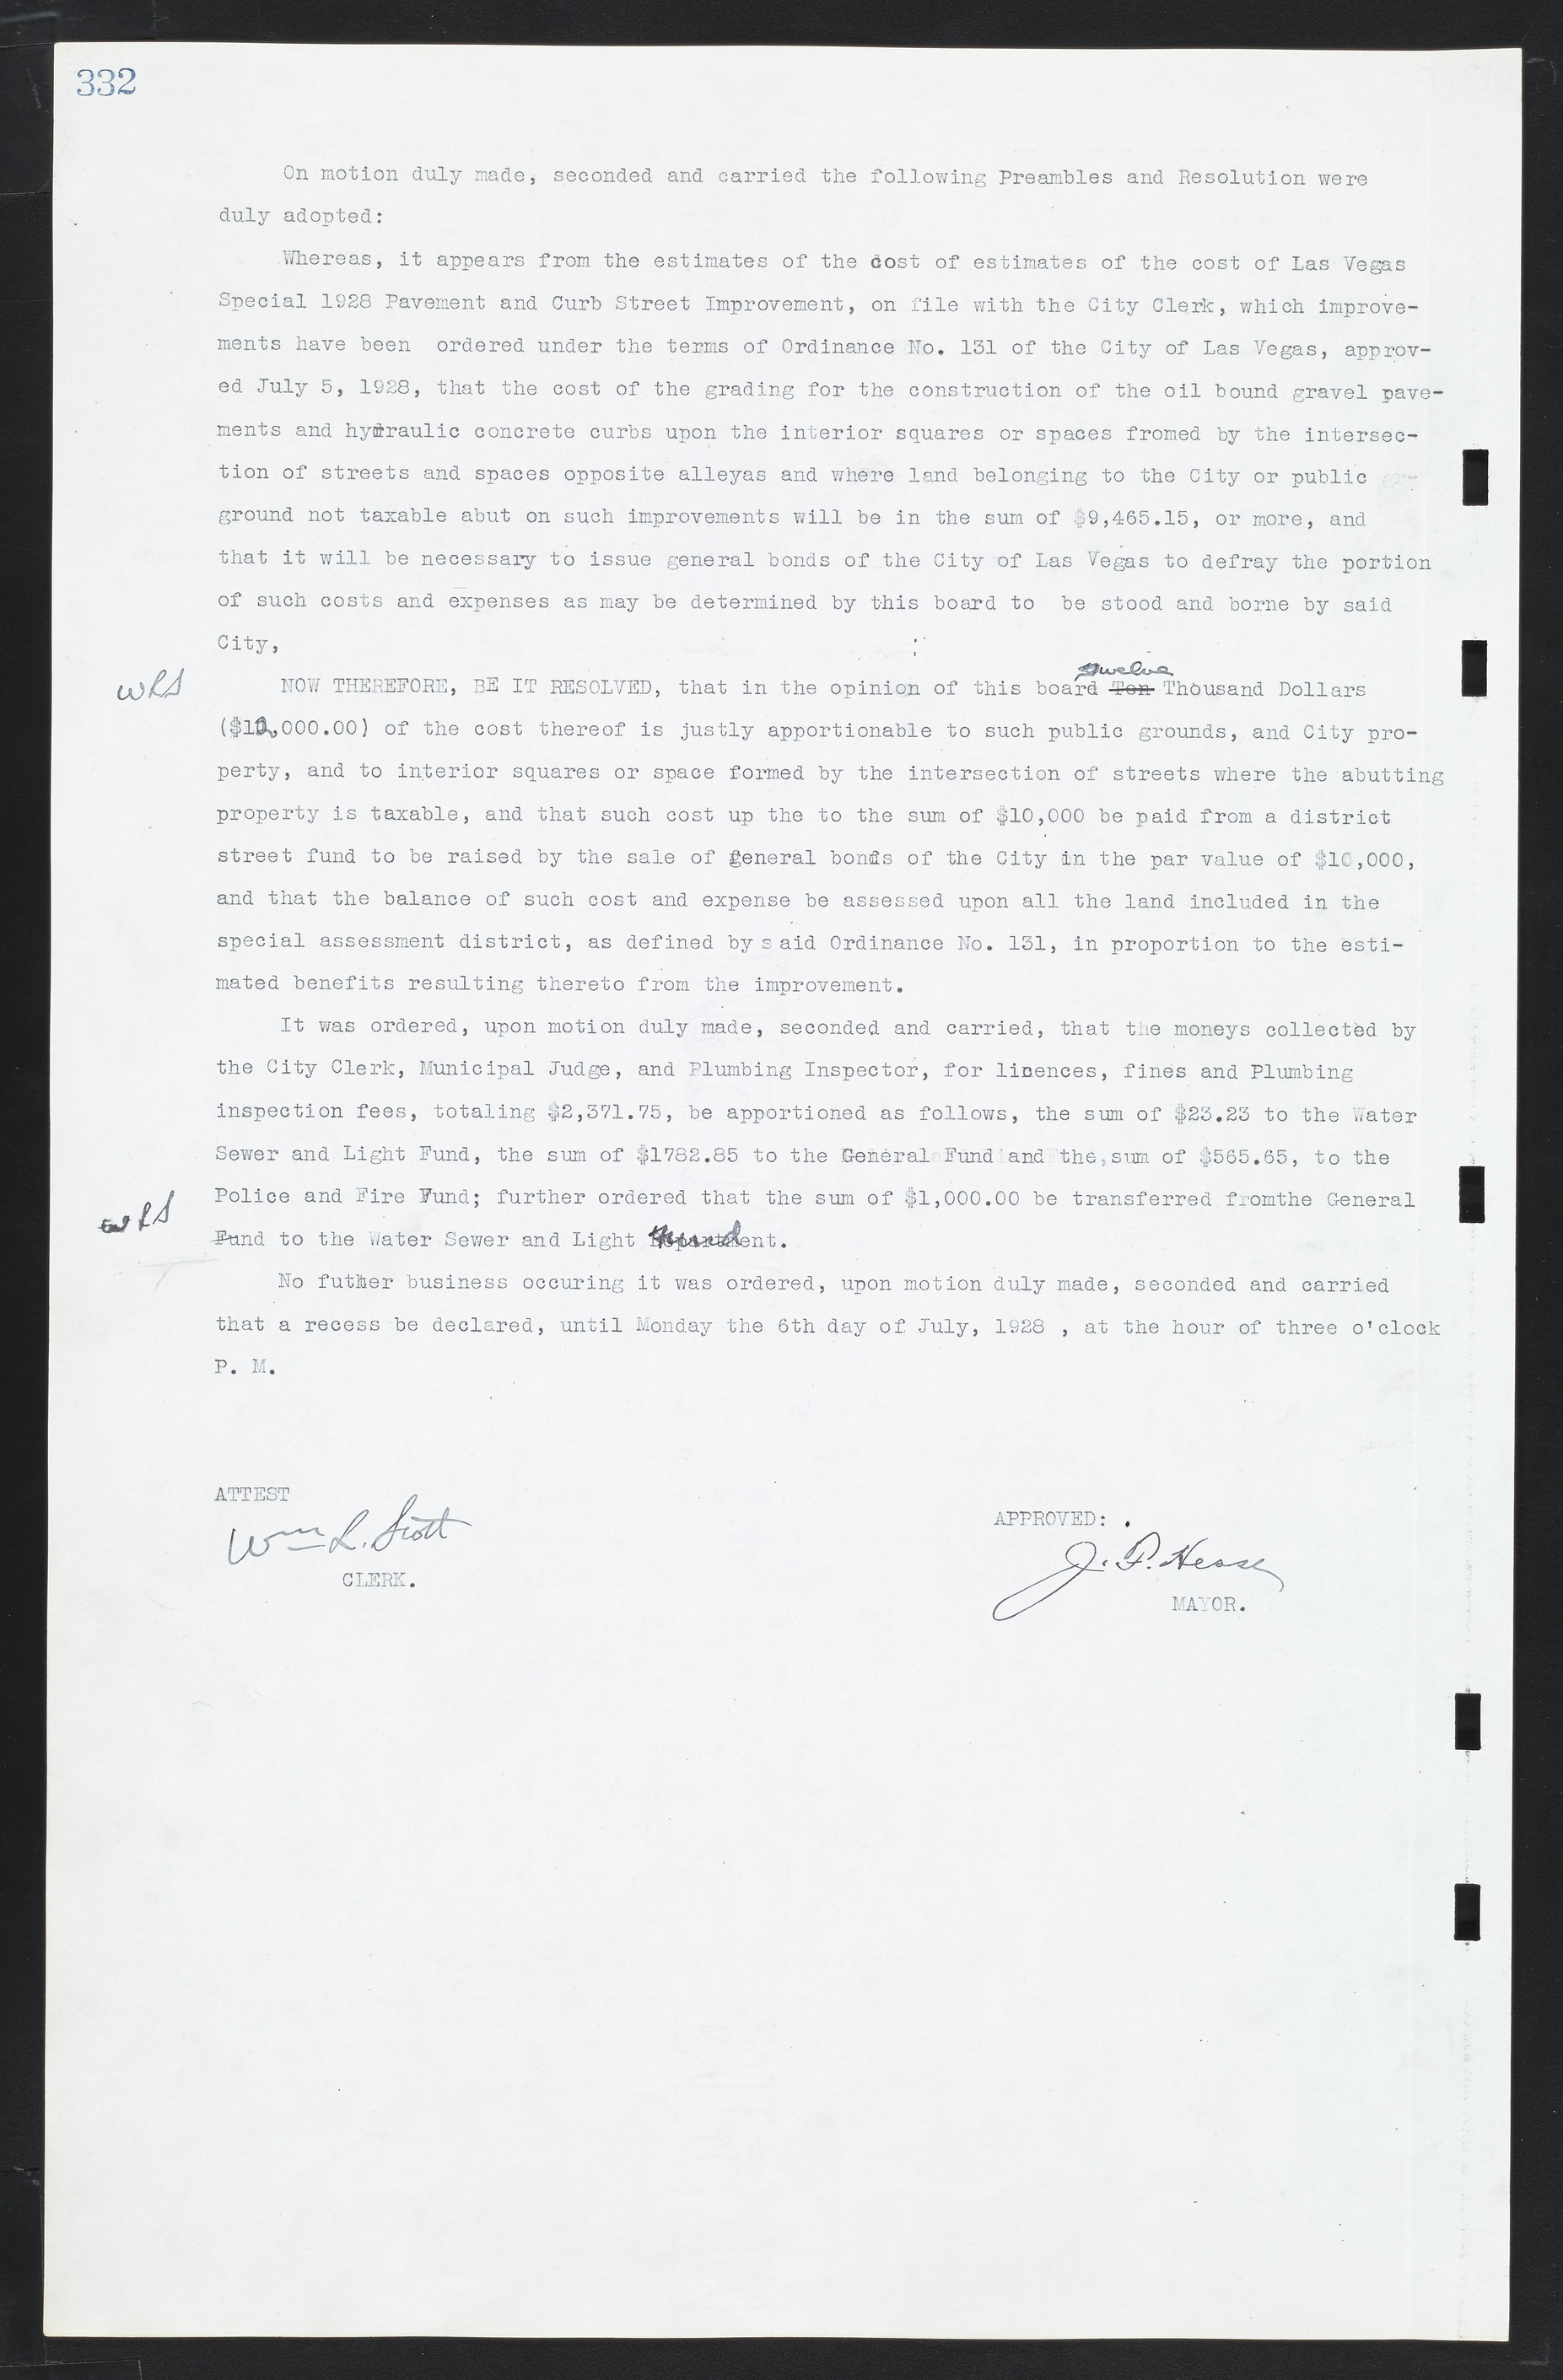 Las Vegas City Commission Minutes, March 1, 1922 to May 10, 1929, lvc000002-341